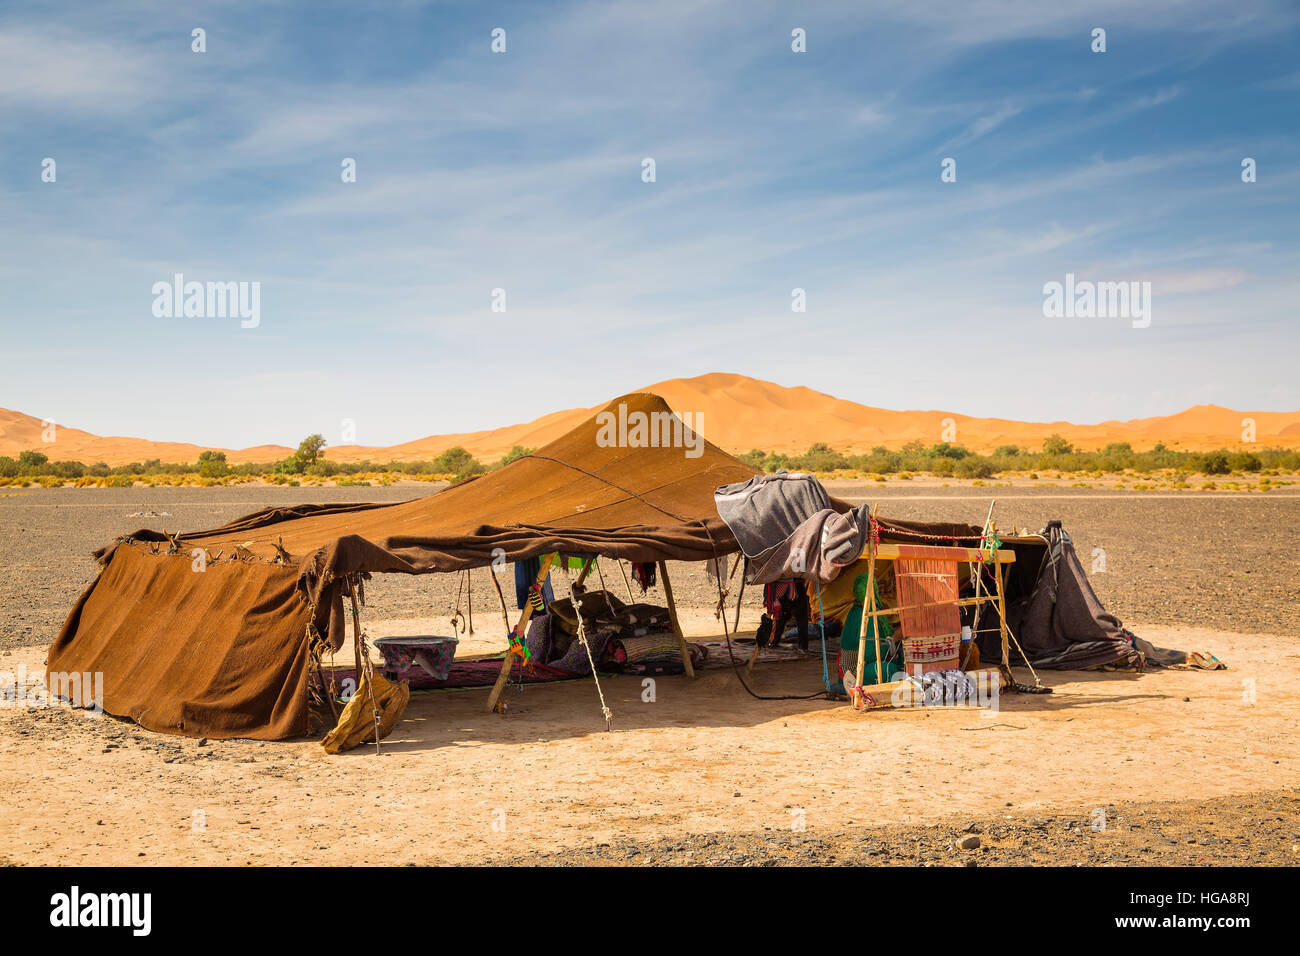 Traditional nomadic dwelling place on the edge of Sahara desert in Morocco Stock Photo